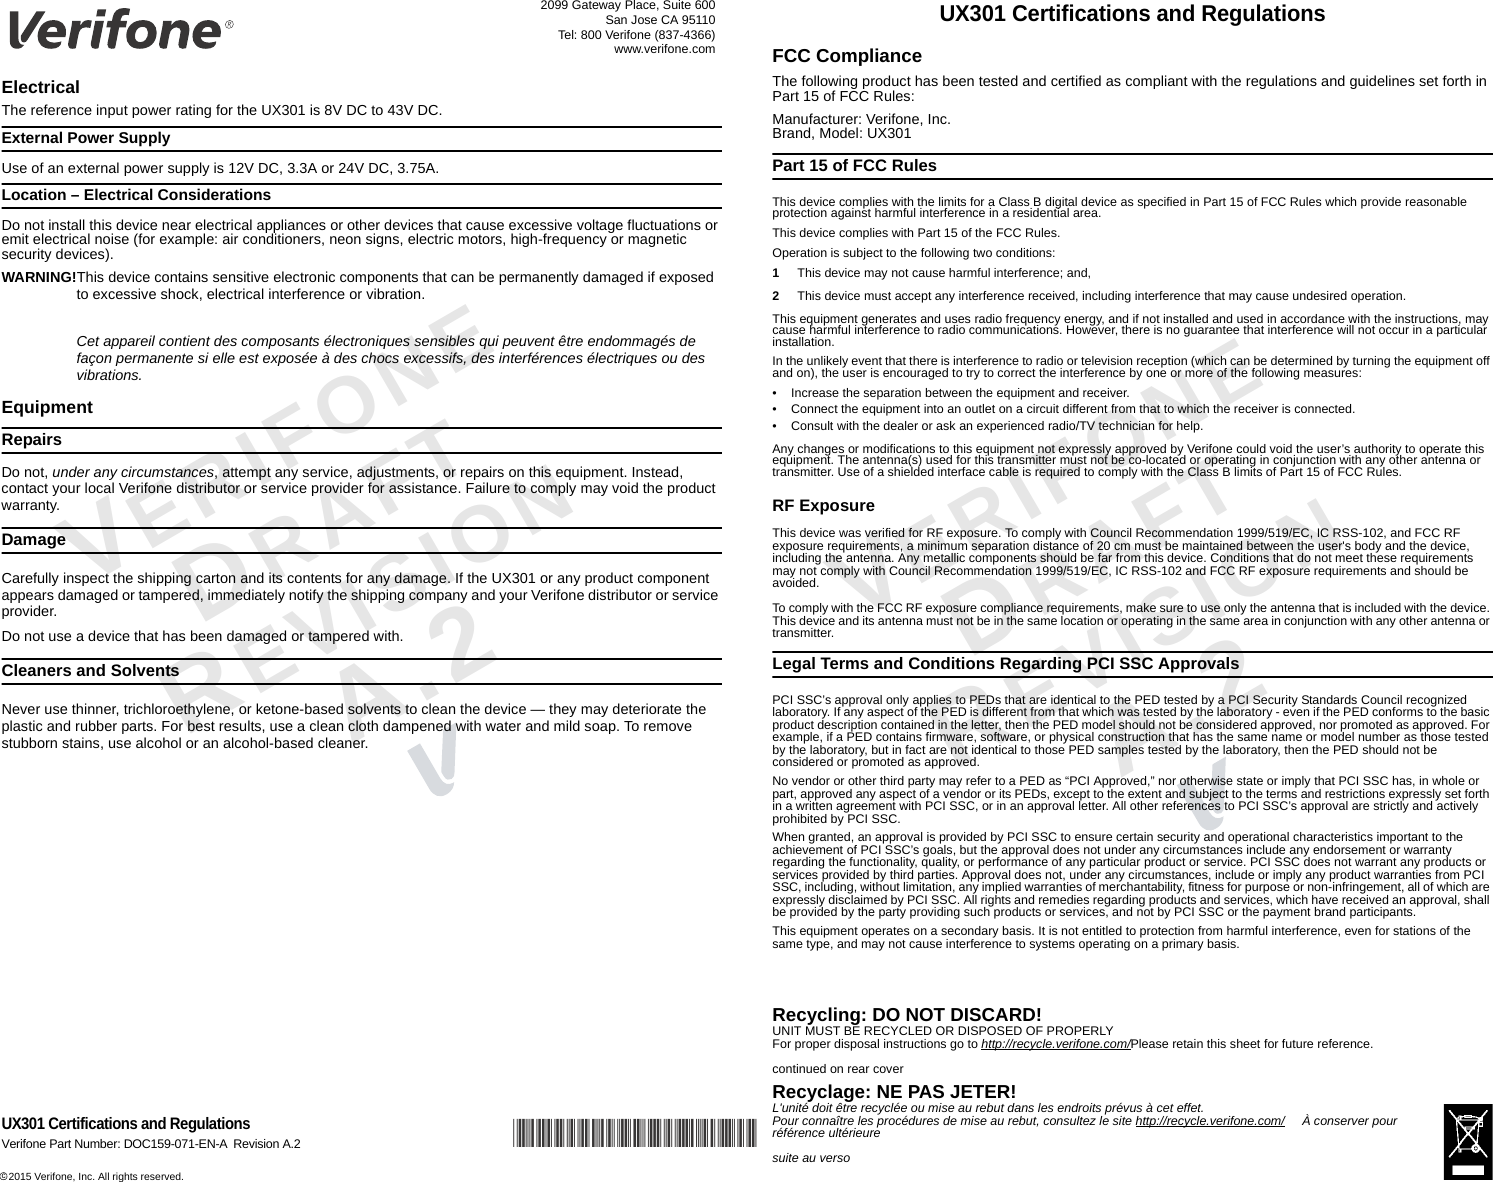 *DOC159-071-EN-A*c 2015 Verifone, Inc. All rights reserved. 2099 Gateway Place, Suite 600San Jose CA 95110Tel: 800 Verifone (837-4366)www.verifone.comUX301 Certifications and RegulationsVerifone Part Number: DOC159-071-EN-A Revision A.2VERIFONEDRAFT REVISION A.2 VERIFONEDRAFT REVISION A.2 ElectricalThe reference input power rating for the UX301 is 8V DC to 43V DC.External Power SupplyUse of an external power supply is 12V DC, 3.3A or 24V DC, 3.75A.Location – Electrical ConsiderationsDo not install this device near electrical appliances or other devices that cause excessive voltage fluctuations or emit electrical noise (for example: air conditioners, neon signs, electric motors, high-frequency or magnetic security devices).WARNING!This device contains sensitive electronic components that can be permanently damaged if exposed to excessive shock, electrical interference or vibration.Cet appareil contient des composants électroniques sensibles qui peuvent être endommagés de façon permanente si elle est exposée à des chocs excessifs, des interférences électriques ou des vibrations.EquipmentRepairsDo not, under any circumstances, attempt any service, adjustments, or repairs on this equipment. Instead, contact your local Verifone distributor or service provider for assistance. Failure to comply may void the product warranty.DamageCarefully inspect the shipping carton and its contents for any damage. If the UX301 or any product component appears damaged or tampered, immediately notify the shipping company and your Verifone distributor or service provider.Do not use a device that has been damaged or tampered with.Cleaners and SolventsNever use thinner, trichloroethylene, or ketone-based solvents to clean the device — they may deteriorate the plastic and rubber parts. For best results, use a clean cloth dampened with water and mild soap. To remove stubborn stains, use alcohol or an alcohol-based cleaner.UX301 Certifications and RegulationsFCC ComplianceThe following product has been tested and certified as compliant with the regulations and guidelines set forth in Part 15 of FCC Rules:Manufacturer: Verifone, Inc.Brand, Model: UX301Part 15 of FCC RulesThis device complies with the limits for a Class B digital device as specified in Part 15 of FCC Rules which provide reasonable protection against harmful interference in a residential area.This device complies with Part 15 of the FCC Rules.Operation is subject to the following two conditions:1This device may not cause harmful interference; and,2This device must accept any interference received, including interference that may cause undesired operation. This equipment generates and uses radio frequency energy, and if not installed and used in accordance with the instructions, may cause harmful interference to radio communications. However, there is no guarantee that interference will not occur in a particular installation. In the unlikely event that there is interference to radio or television reception (which can be determined by turning the equipment off and on), the user is encouraged to try to correct the interference by one or more of the following measures:• Increase the separation between the equipment and receiver.• Connect the equipment into an outlet on a circuit different from that to which the receiver is connected.• Consult with the dealer or ask an experienced radio/TV technician for help.Any changes or modifications to this equipment not expressly approved by Verifone could void the user’s authority to operate this equipment. The antenna(s) used for this transmitter must not be co-located or operating in conjunction with any other antenna or transmitter. Use of a shielded interface cable is required to comply with the Class B limits of Part 15 of FCC Rules.RF ExposureThis device was verified for RF exposure. To comply with Council Recommendation 1999/519/EC, IC RSS-102, and FCC RF exposure requirements, a minimum separation distance of 20 cm must be maintained between the user&apos;s body and the device, including the antenna. Any metallic components should be far from this device. Conditions that do not meet these requirements may not comply with Council Recommendation 1999/519/EC, IC RSS-102 and FCC RF exposure requirements and should be avoided.To comply with the FCC RF exposure compliance requirements, make sure to use only the antenna that is included with the device. This device and its antenna must not be in the same location or operating in the same area in conjunction with any other antenna or transmitter.Legal Terms and Conditions Regarding PCI SSC ApprovalsPCI SSC’s approval only applies to PEDs that are identical to the PED tested by a PCI Security Standards Council recognized laboratory. If any aspect of the PED is different from that which was tested by the laboratory - even if the PED conforms to the basic product description contained in the letter, then the PED model should not be considered approved, nor promoted as approved. For example, if a PED contains firmware, software, or physical construction that has the same name or model number as those tested by the laboratory, but in fact are not identical to those PED samples tested by the laboratory, then the PED should not be considered or promoted as approved.No vendor or other third party may refer to a PED as “PCI Approved,” nor otherwise state or imply that PCI SSC has, in whole or part, approved any aspect of a vendor or its PEDs, except to the extent and subject to the terms and restrictions expressly set forth in a written agreement with PCI SSC, or in an approval letter. All other references to PCI SSC’s approval are strictly and actively prohibited by PCI SSC.When granted, an approval is provided by PCI SSC to ensure certain security and operational characteristics important to the achievement of PCI SSC’s goals, but the approval does not under any circumstances include any endorsement or warranty regarding the functionality, quality, or performance of any particular product or service. PCI SSC does not warrant any products or services provided by third parties. Approval does not, under any circumstances, include or imply any product warranties from PCI SSC, including, without limitation, any implied warranties of merchantability, fitness for purpose or non-infringement, all of which are expressly disclaimed by PCI SSC. All rights and remedies regarding products and services, which have received an approval, shall be provided by the party providing such products or services, and not by PCI SSC or the payment brand participants.This equipment operates on a secondary basis. It is not entitled to protection from harmful interference, even for stations of the same type, and may not cause interference to systems operating on a primary basis.Recycling: DO NOT DISCARD! UNIT MUST BE RECYCLED OR DISPOSED OF PROPERLYFor proper disposal instructions go to http://recycle.verifone.com/Please retain this sheet for future reference.continued on rear coverRecyclage: NE PAS JETER! L&apos;unité doit être recyclée ou mise au rebut dans les endroits prévus à cet effet.Pour connaître les procédures de mise au rebut, consultez le site http://recycle.verifone.com/     À conserver pour référence ultérieuresuite au verso